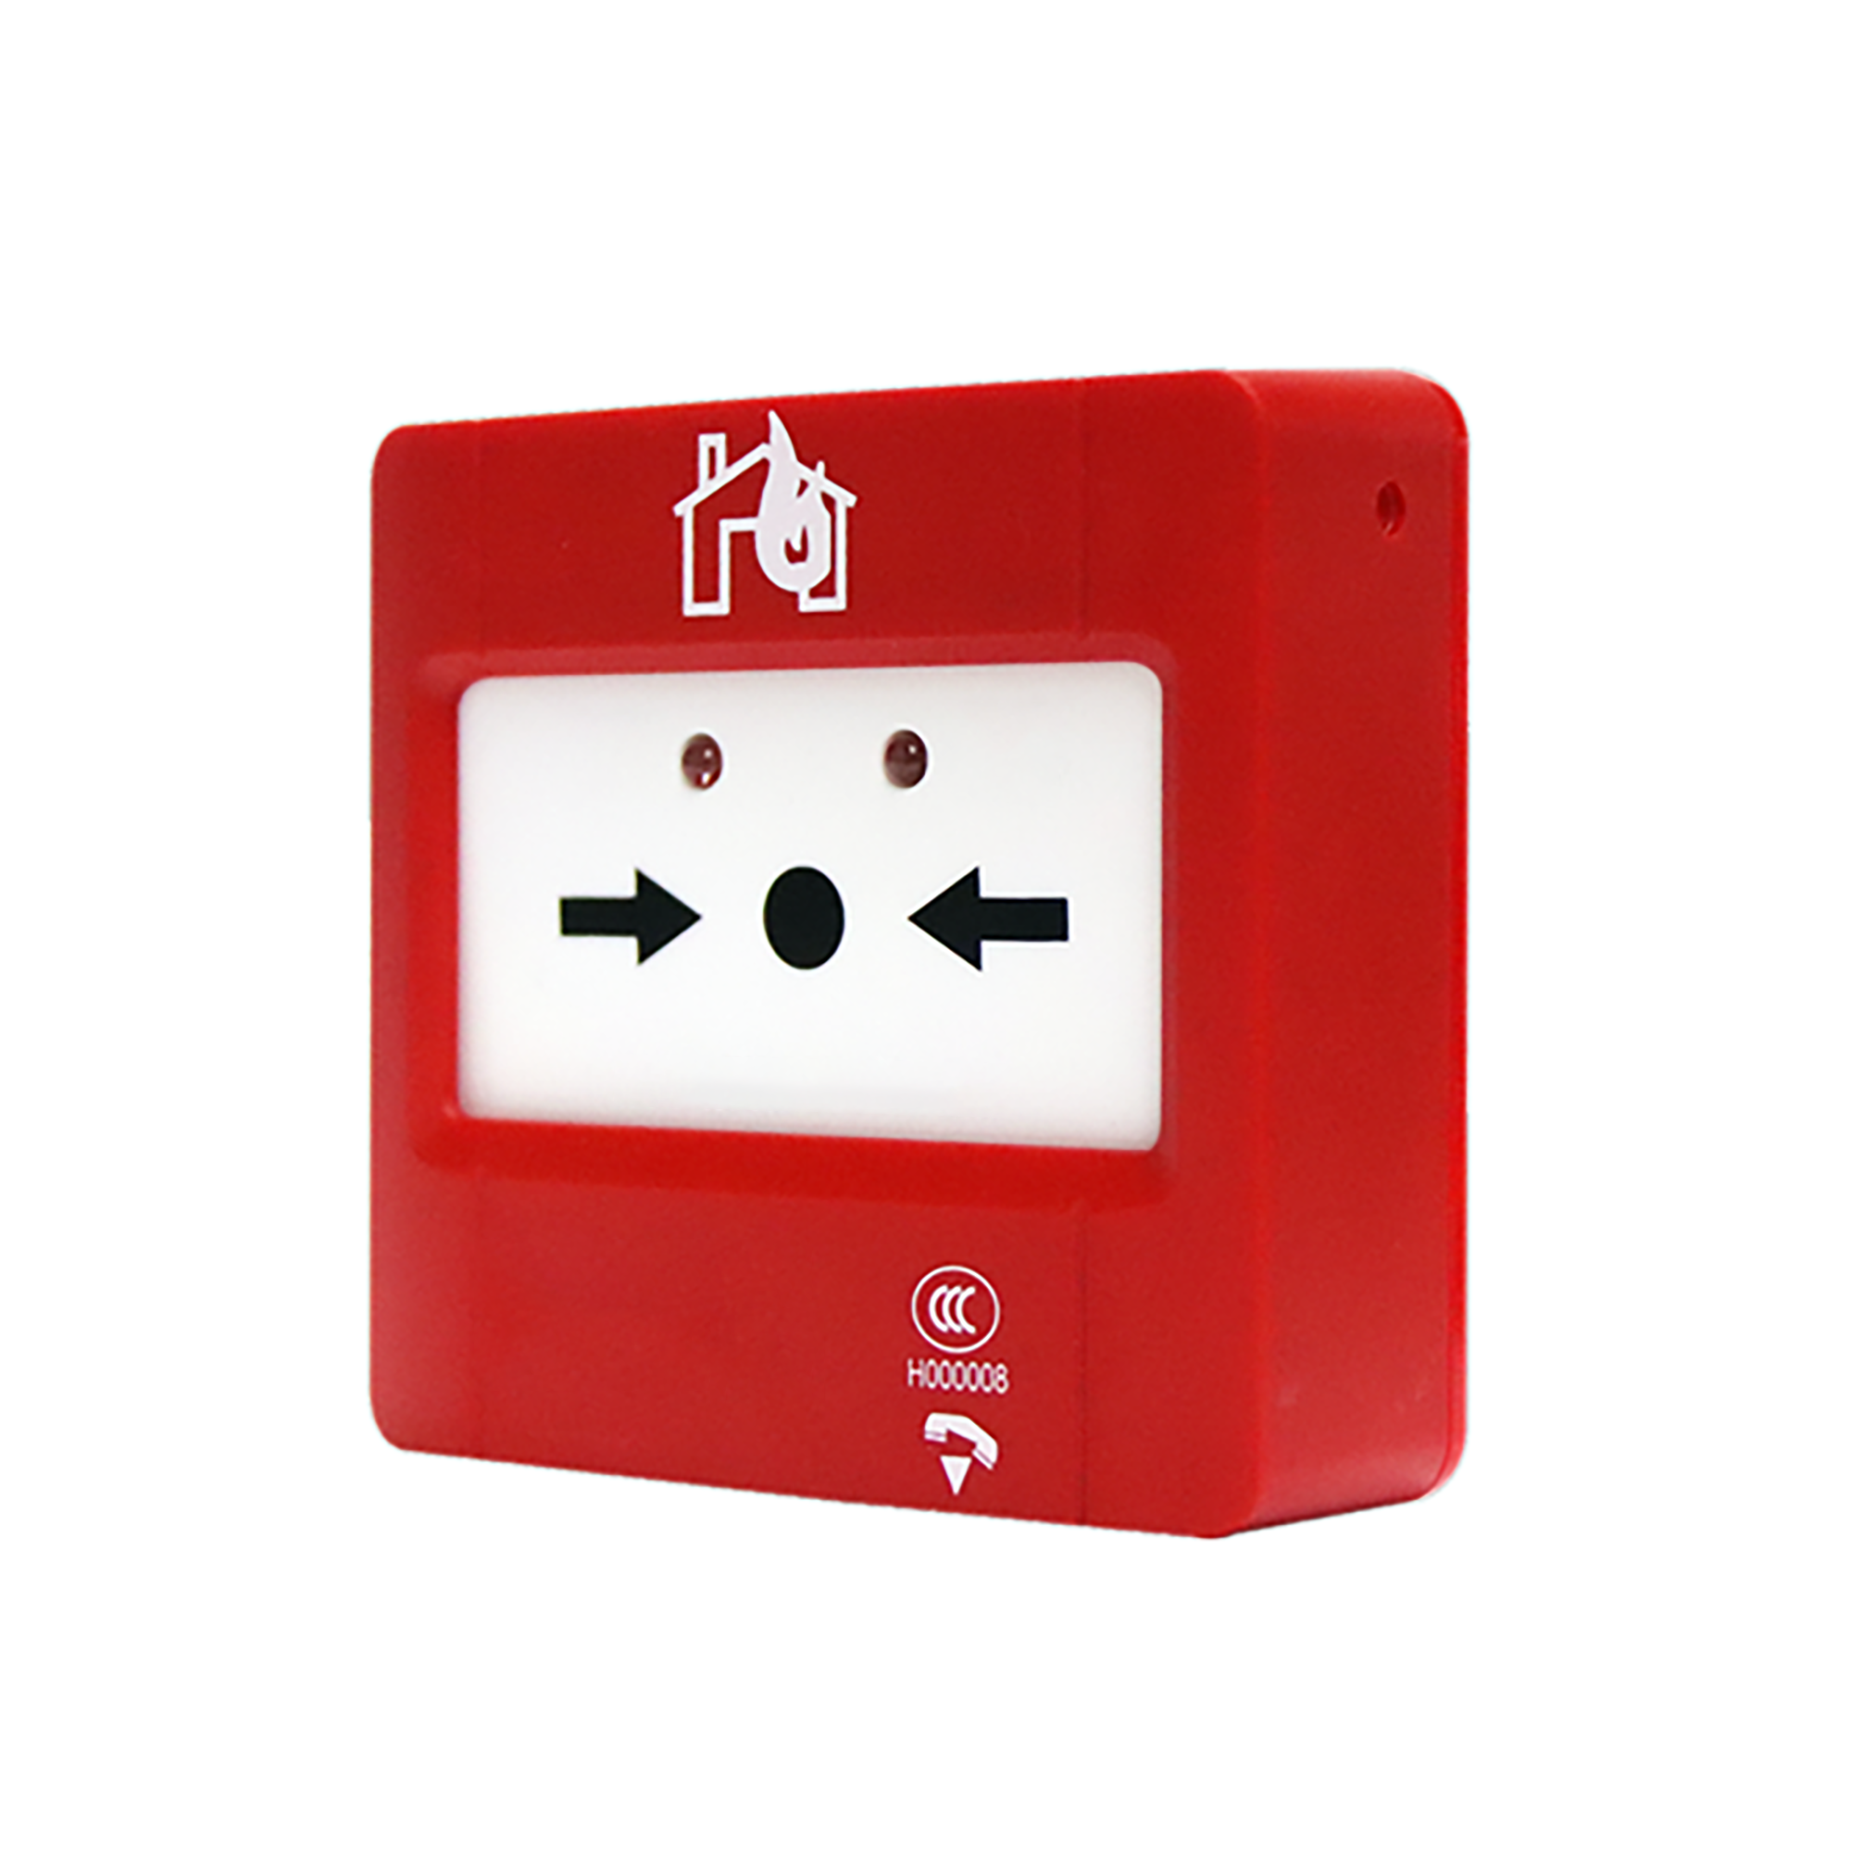  Manual Fire Alarm Button with Telephone Jack